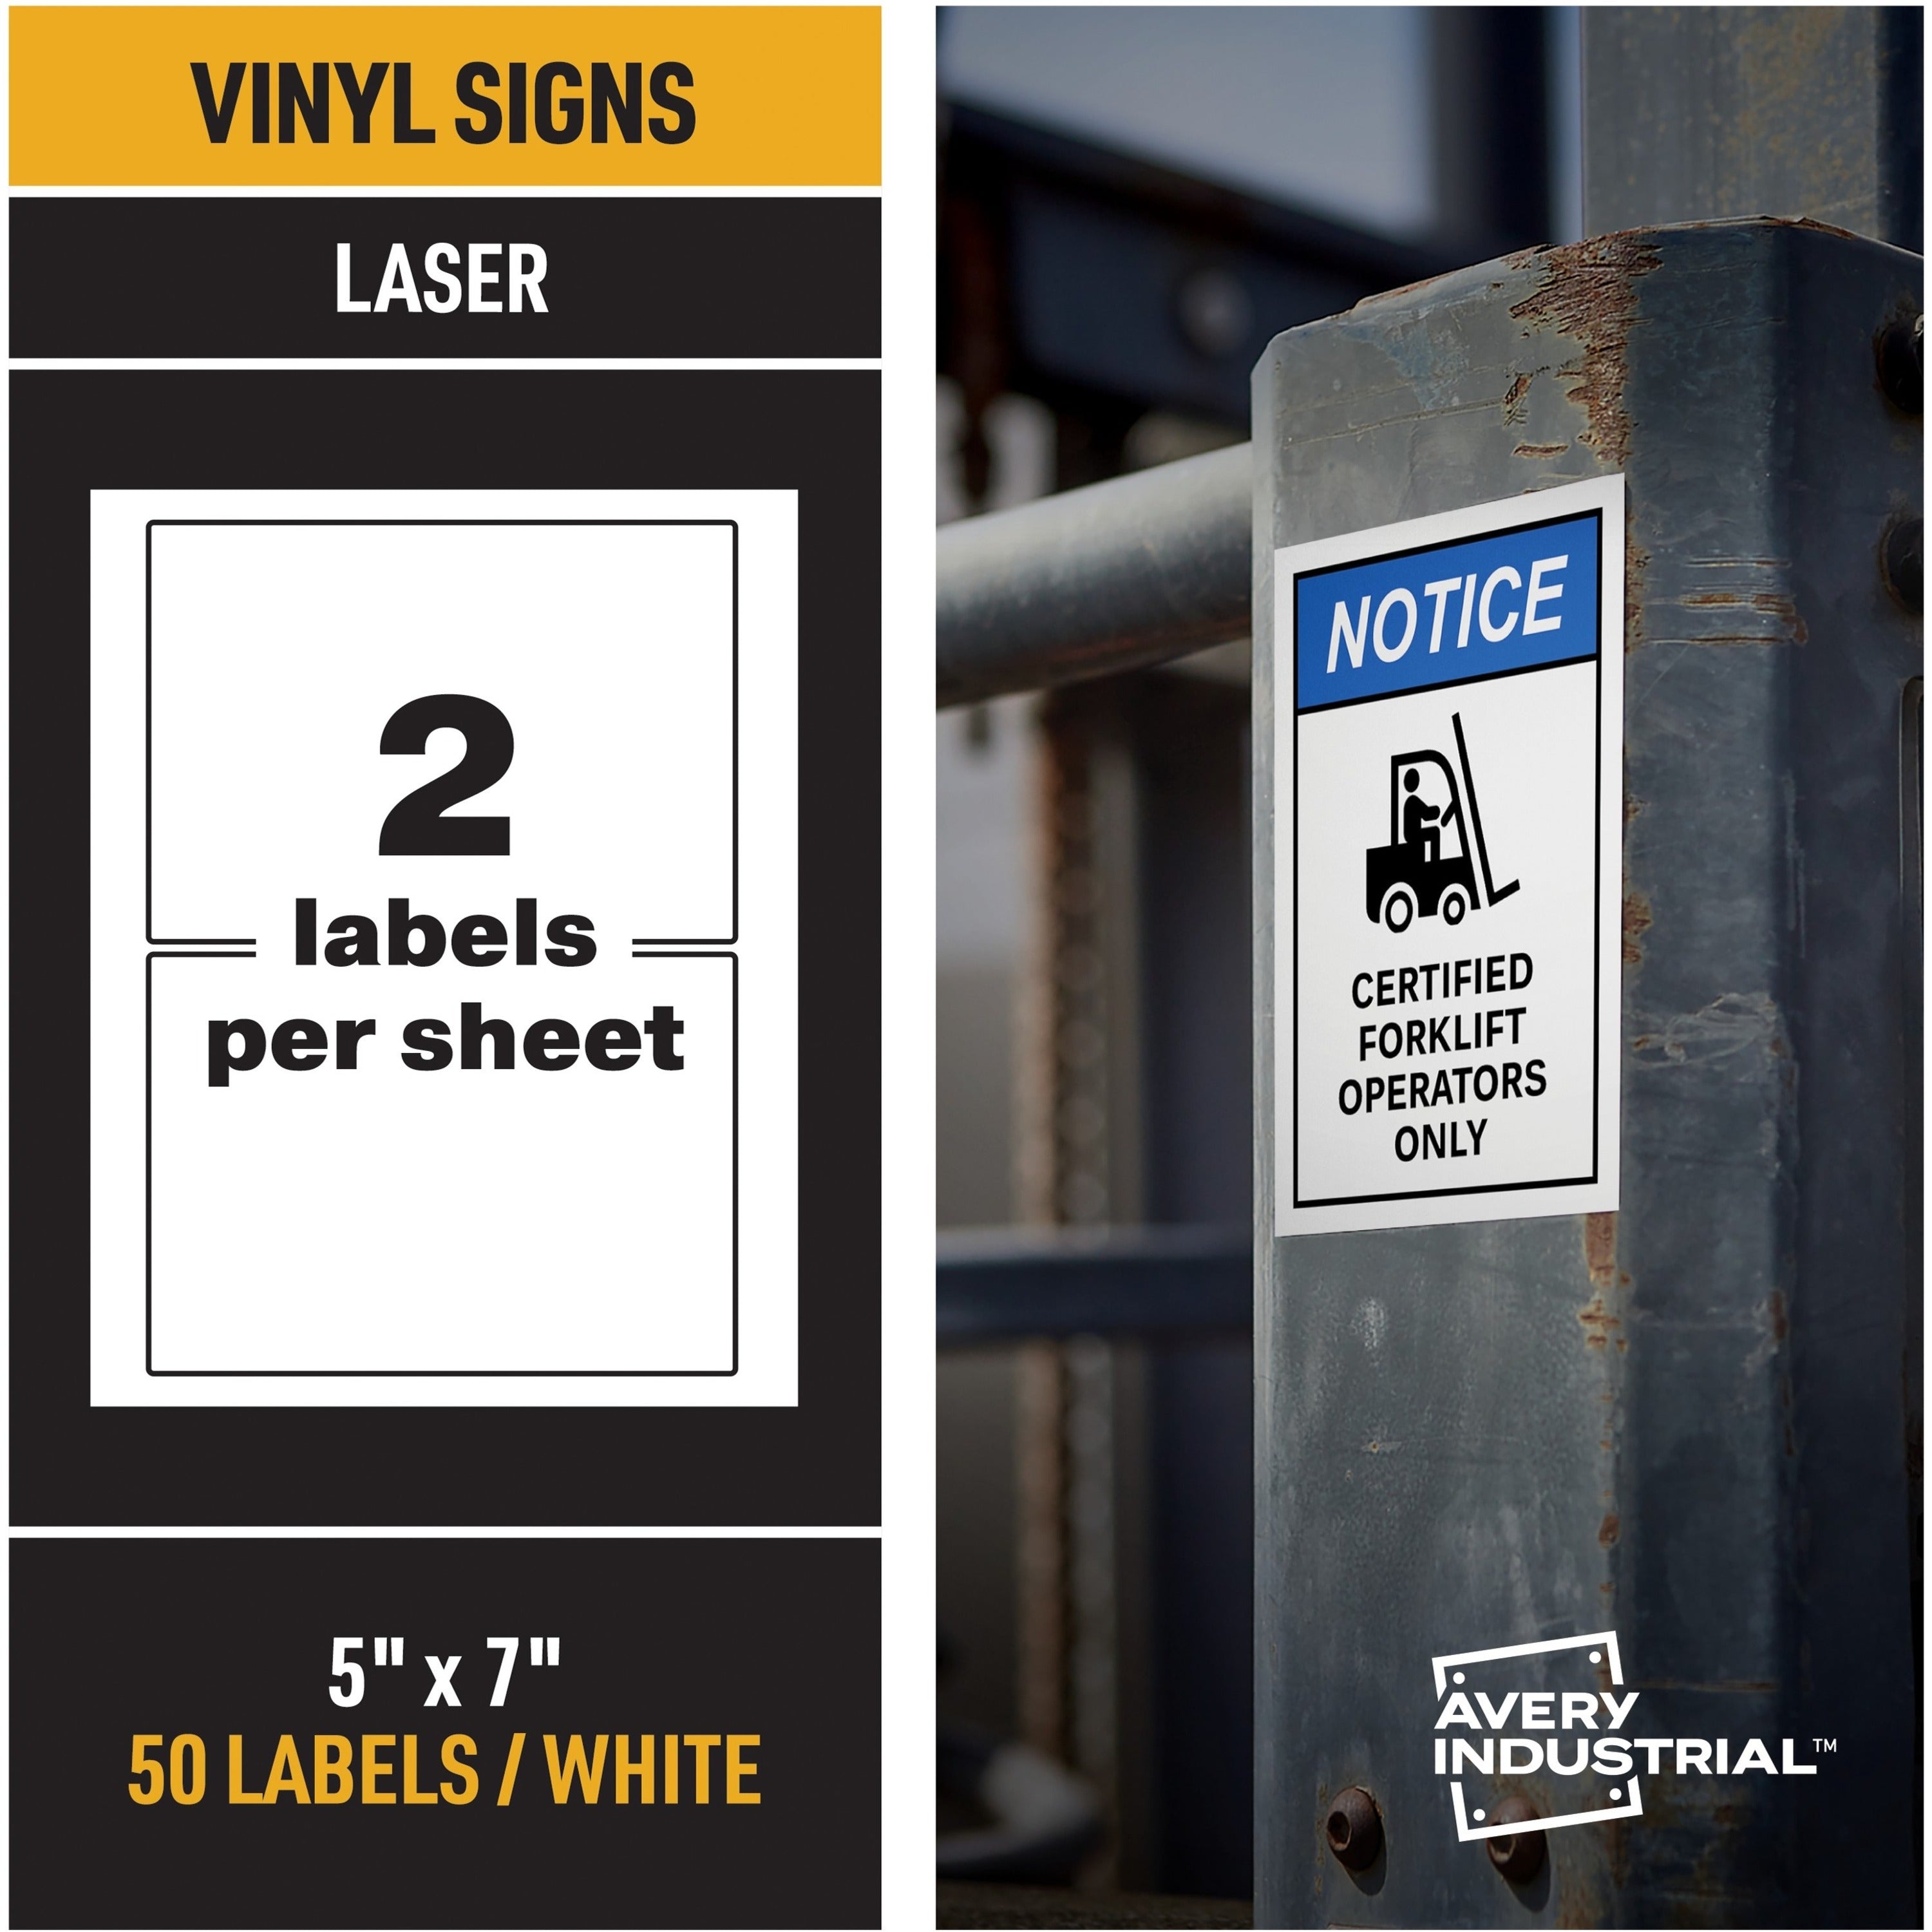 avery-adhesive-printable-vinyl-signs-waterproof-5-width-x-7-length-permanent-adhesive-rectangle-laser-white-vinyl-2-sheet-25-total-sheets-50-total-labels-50-label-print-to-the-edge-permanent-adhesive-customizable_ave61551 - 1